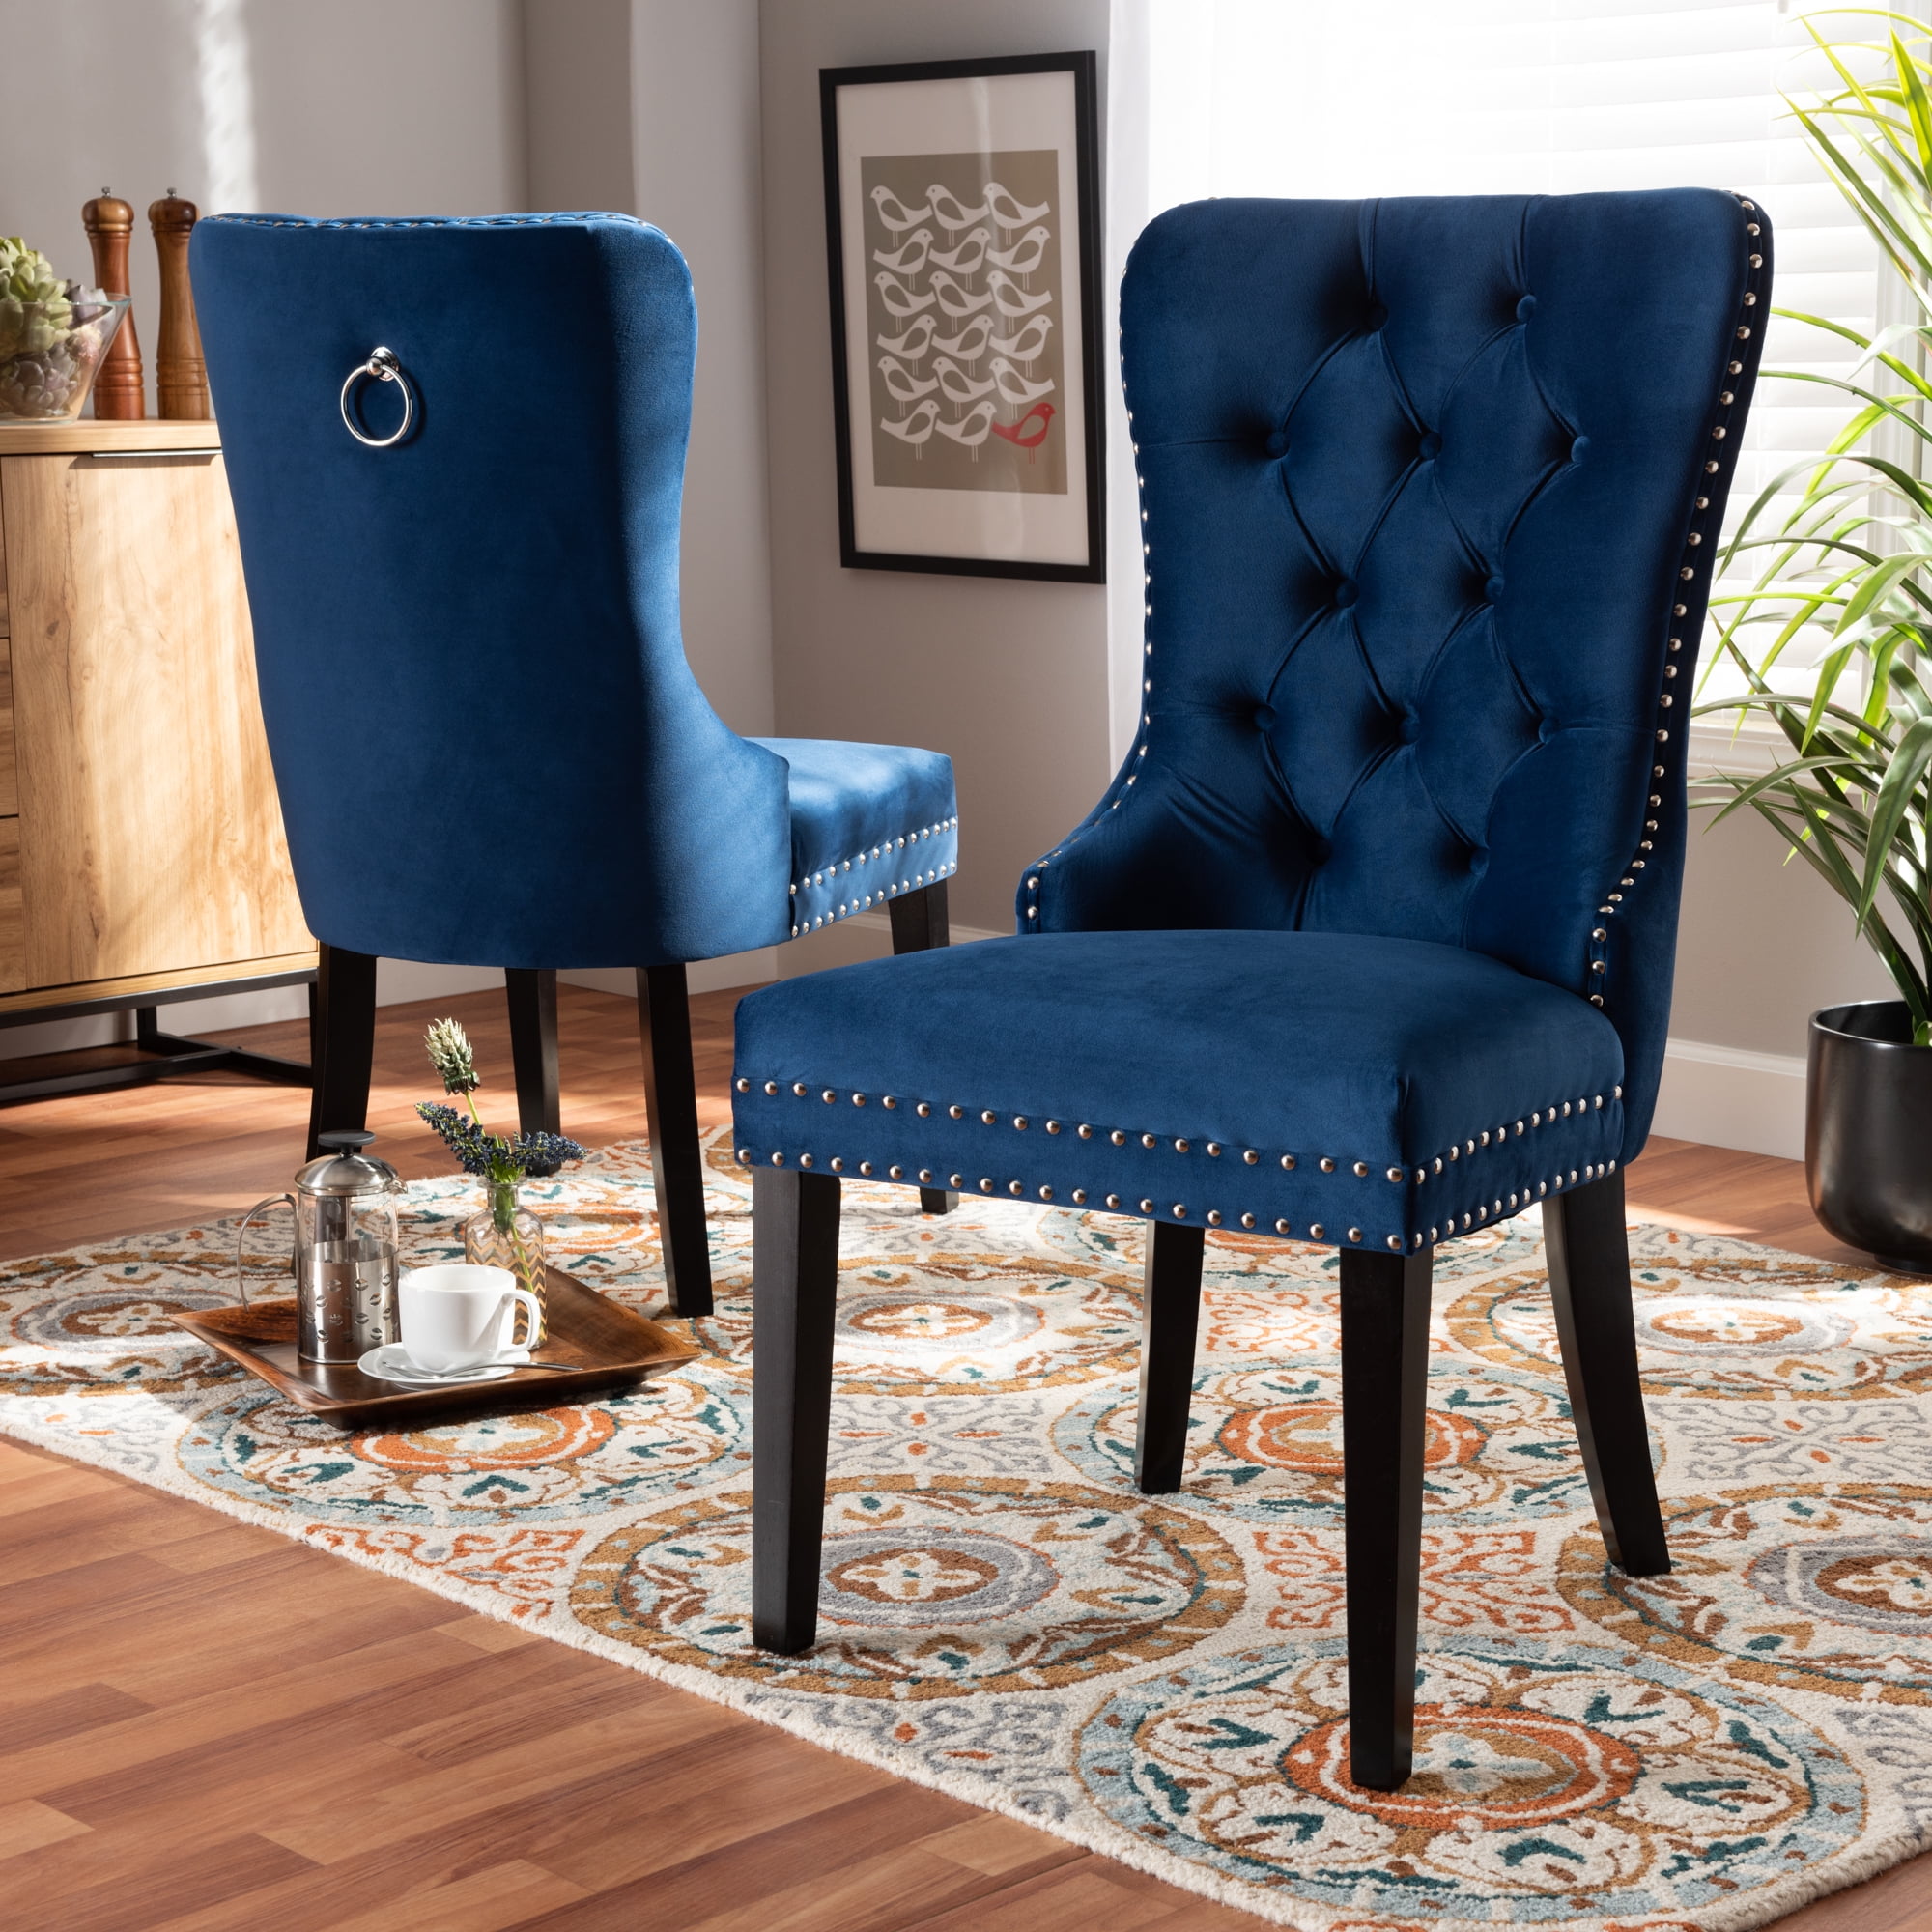 Baxton Studio Remy Modern Transitional, Navy Blue Parsons Chairs